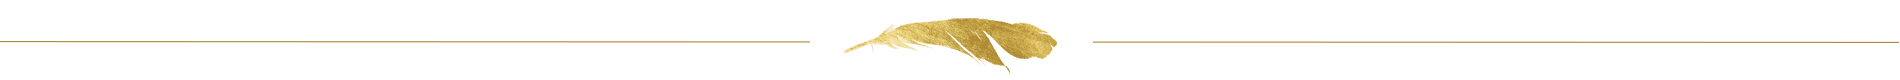 New-Gold-Feather-Line-1.png